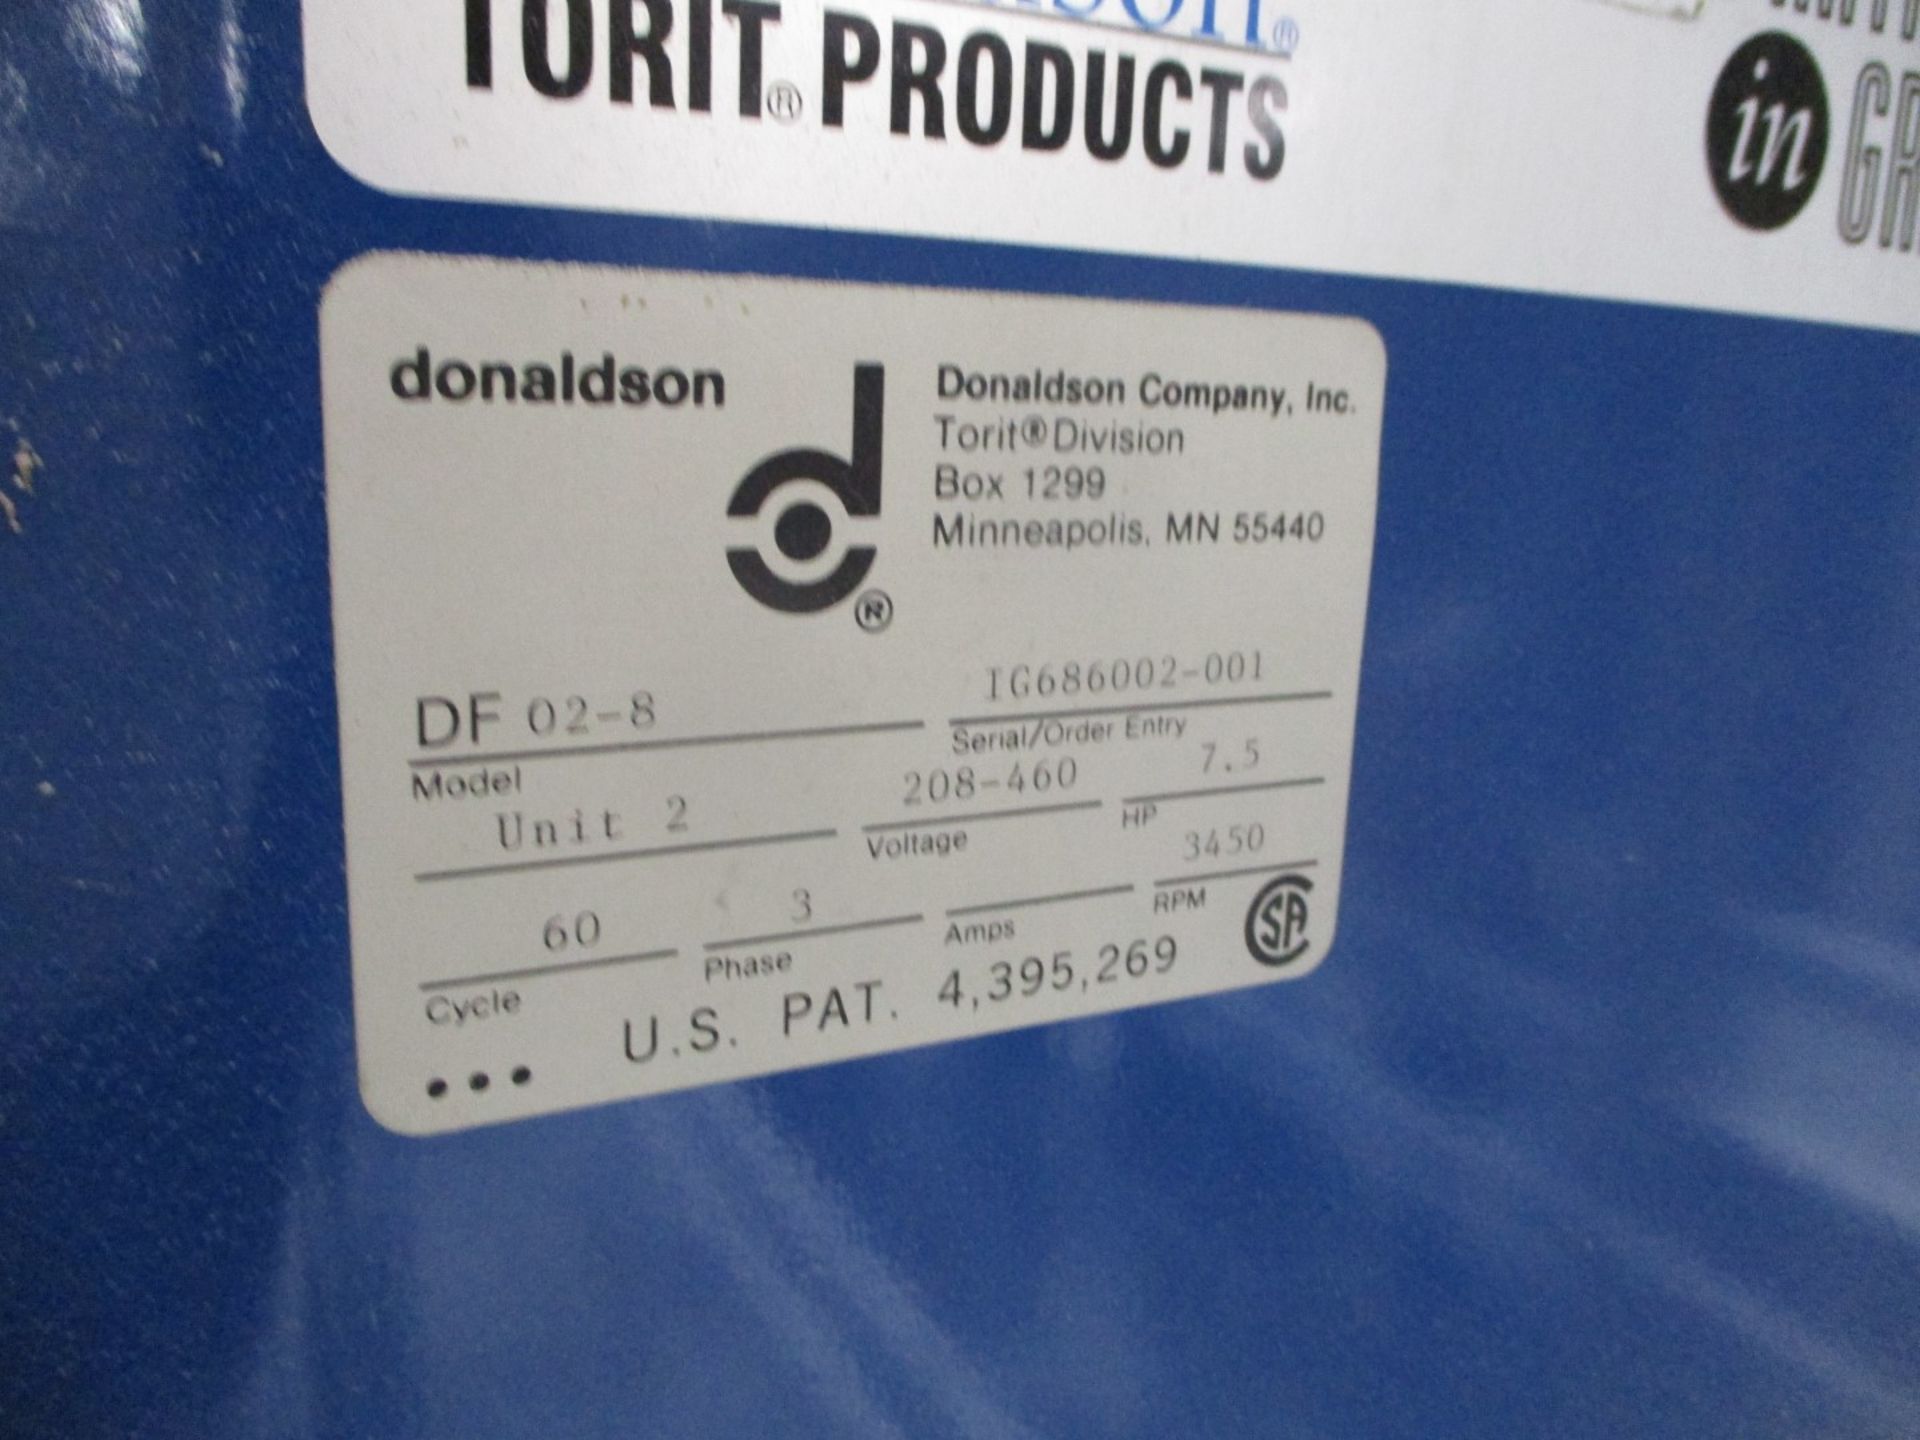 1520 Sq Ft Torit Dust Collector, Model Dfo2-8, With 7.5 Hp Blower, Serial# Ig686002 | Rig Fee $1200 - Image 2 of 4